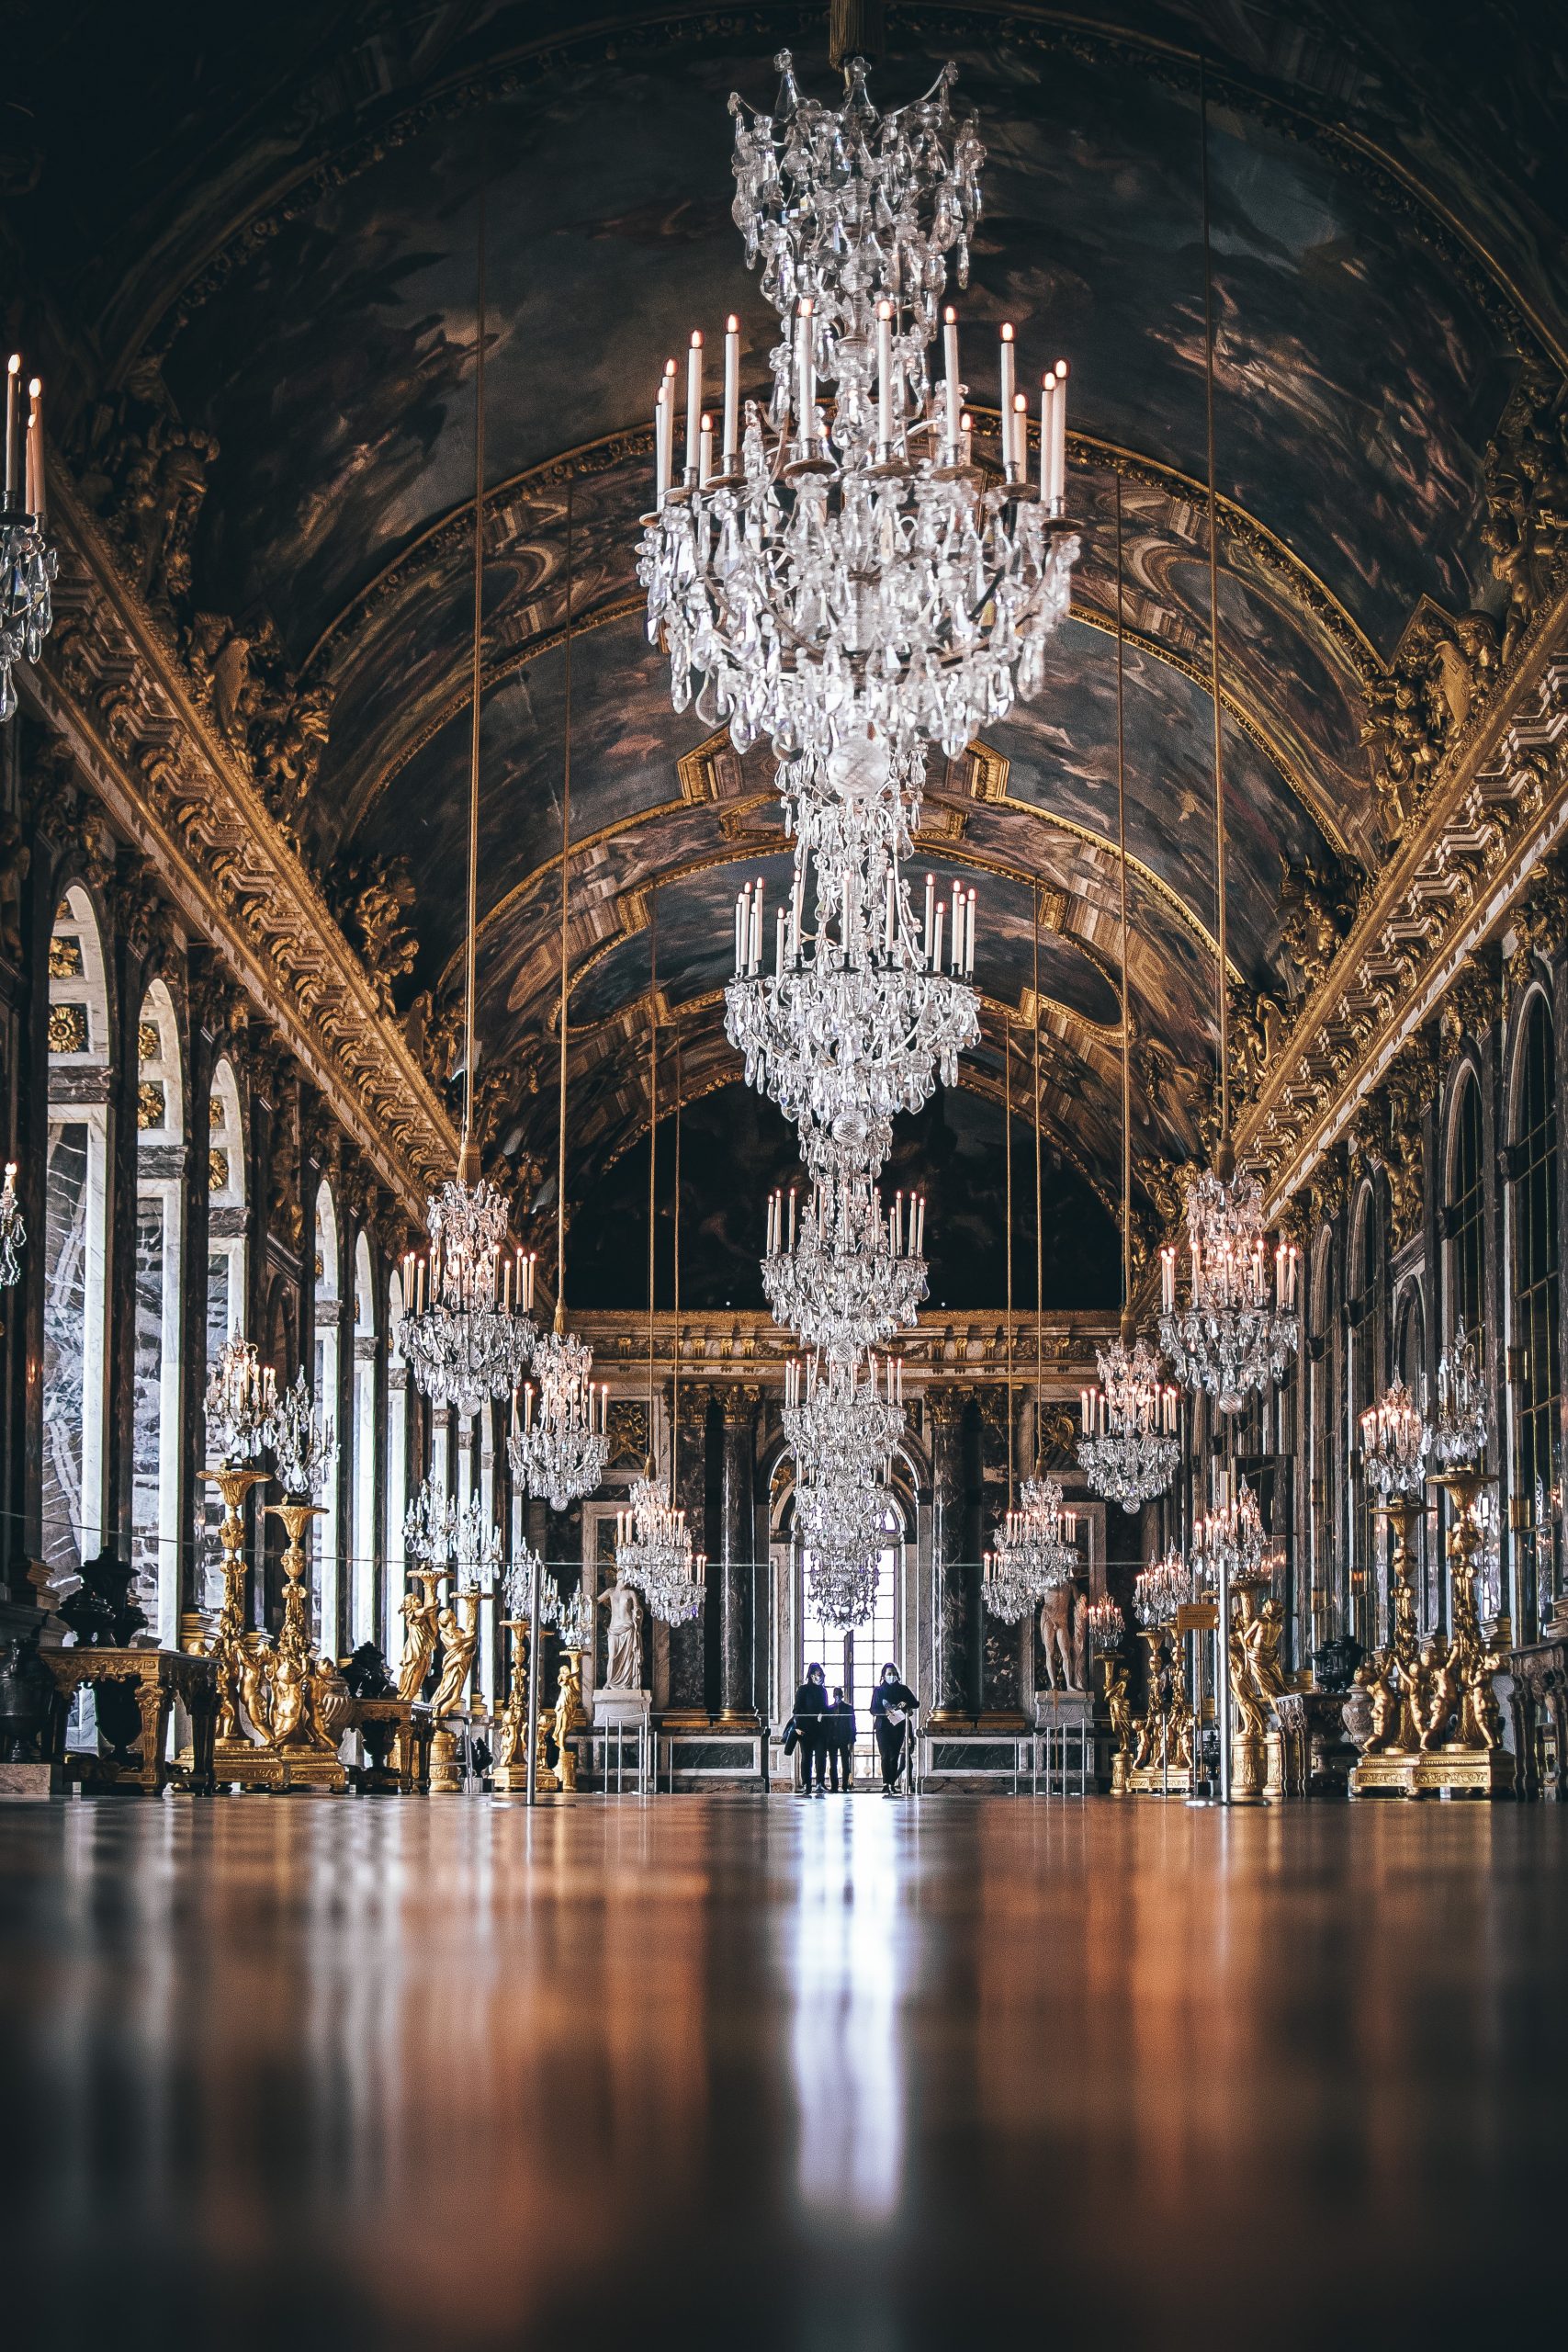 Hall of Mirrors, Palace of Versailles - Most Visited Country in the World